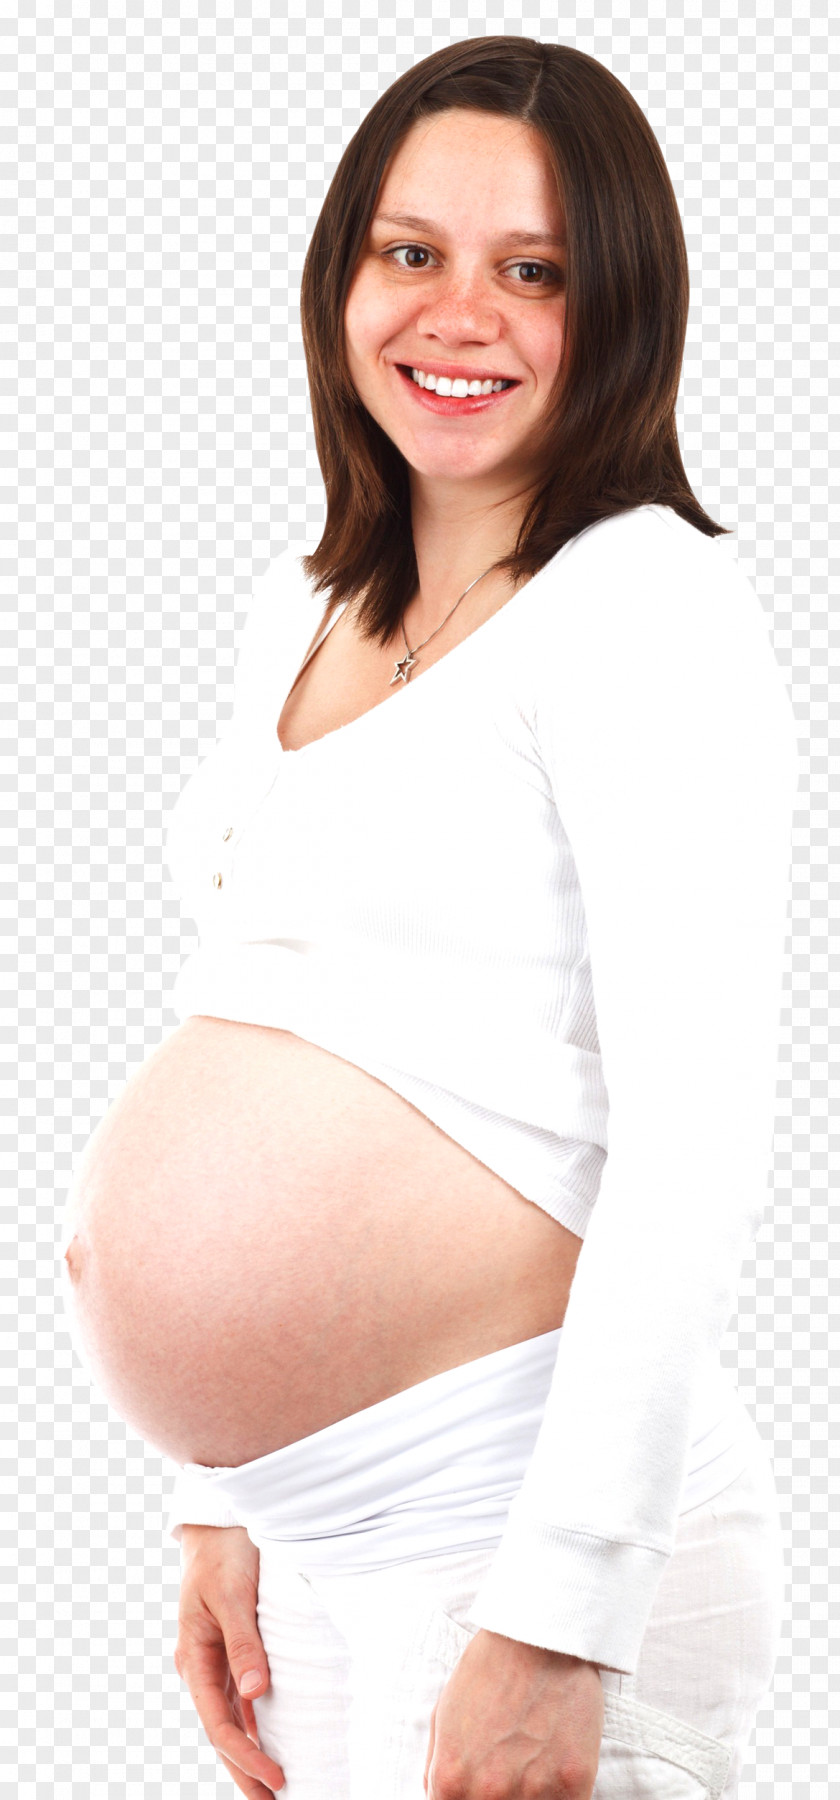 Pregnant Woman Pregnancy Childbirth Maternal Death Pixabay Caesarean Section PNG